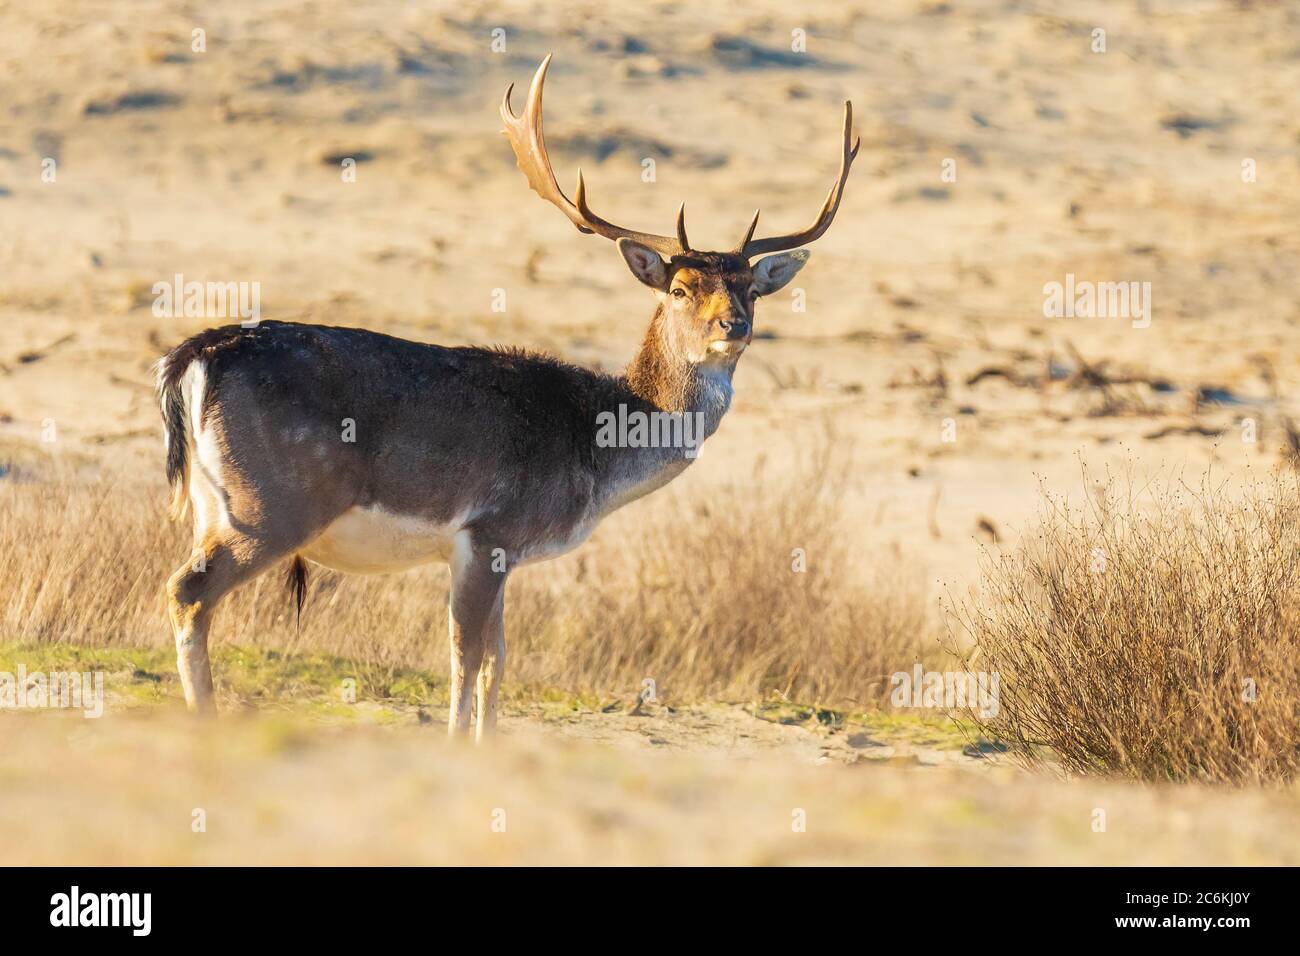 Fallow deer stag Dama Dama with big antlers foraging in a dune landscape, selective focus used. Stock Photo